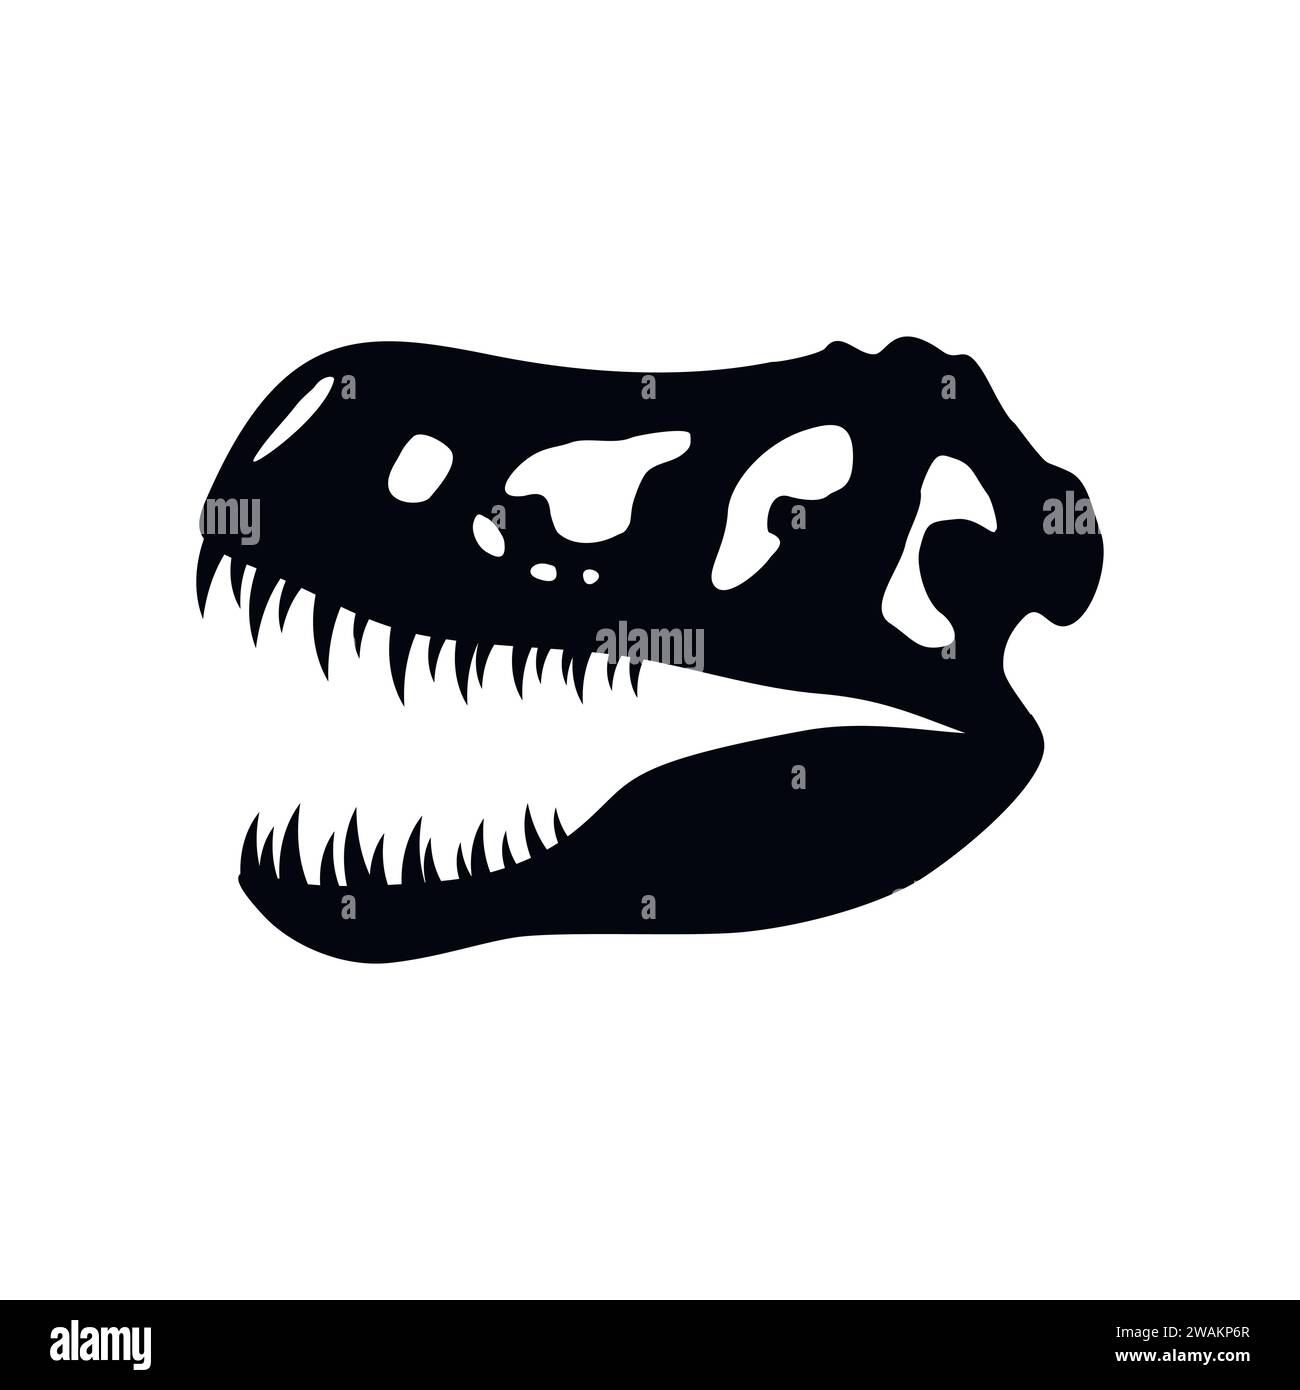 Dinosaur skull icon isolated on a white background, Tyrannosaurus Rex head fossil. Ancient remains of dino skeleton, Prehistoric reptile, Paleontology Stock Vector